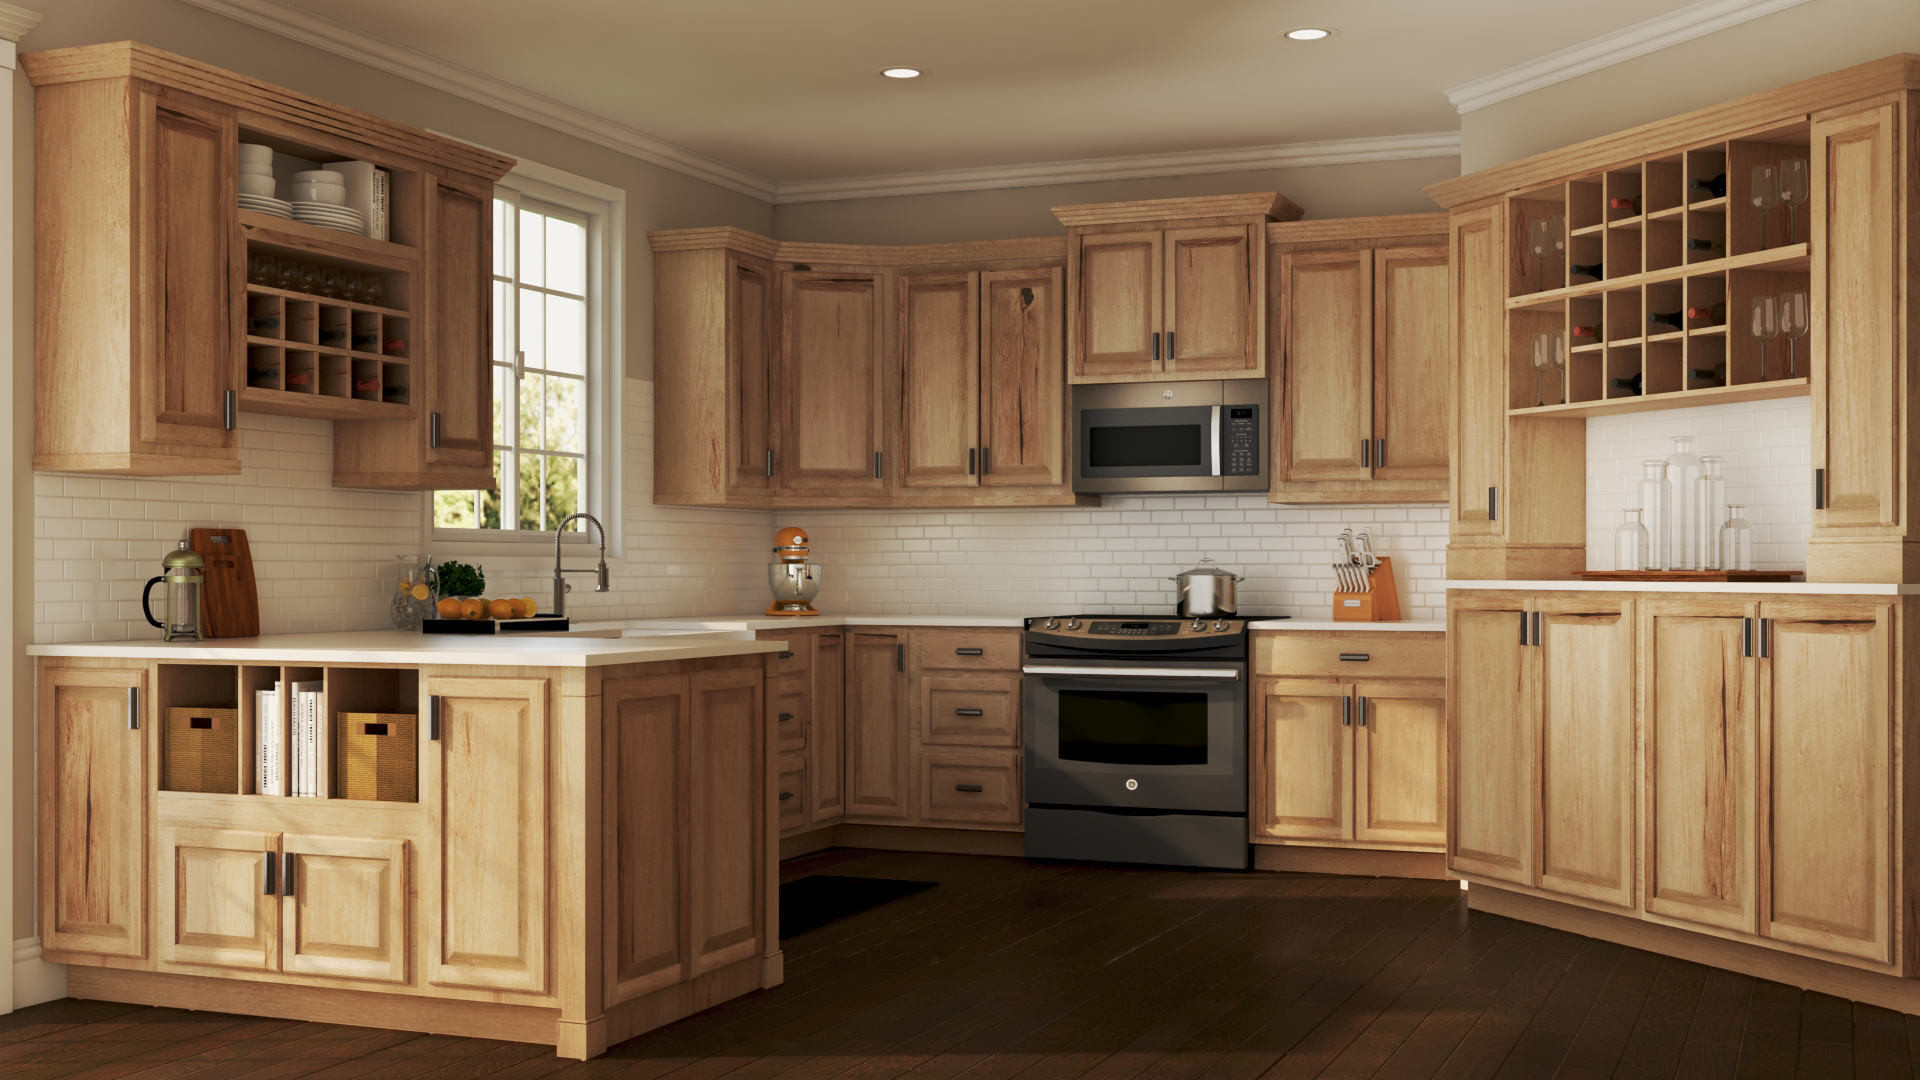 Home Depot Kitchen Cabinet
 Hampton Wall Kitchen Cabinets in Natural Hickory – Kitchen